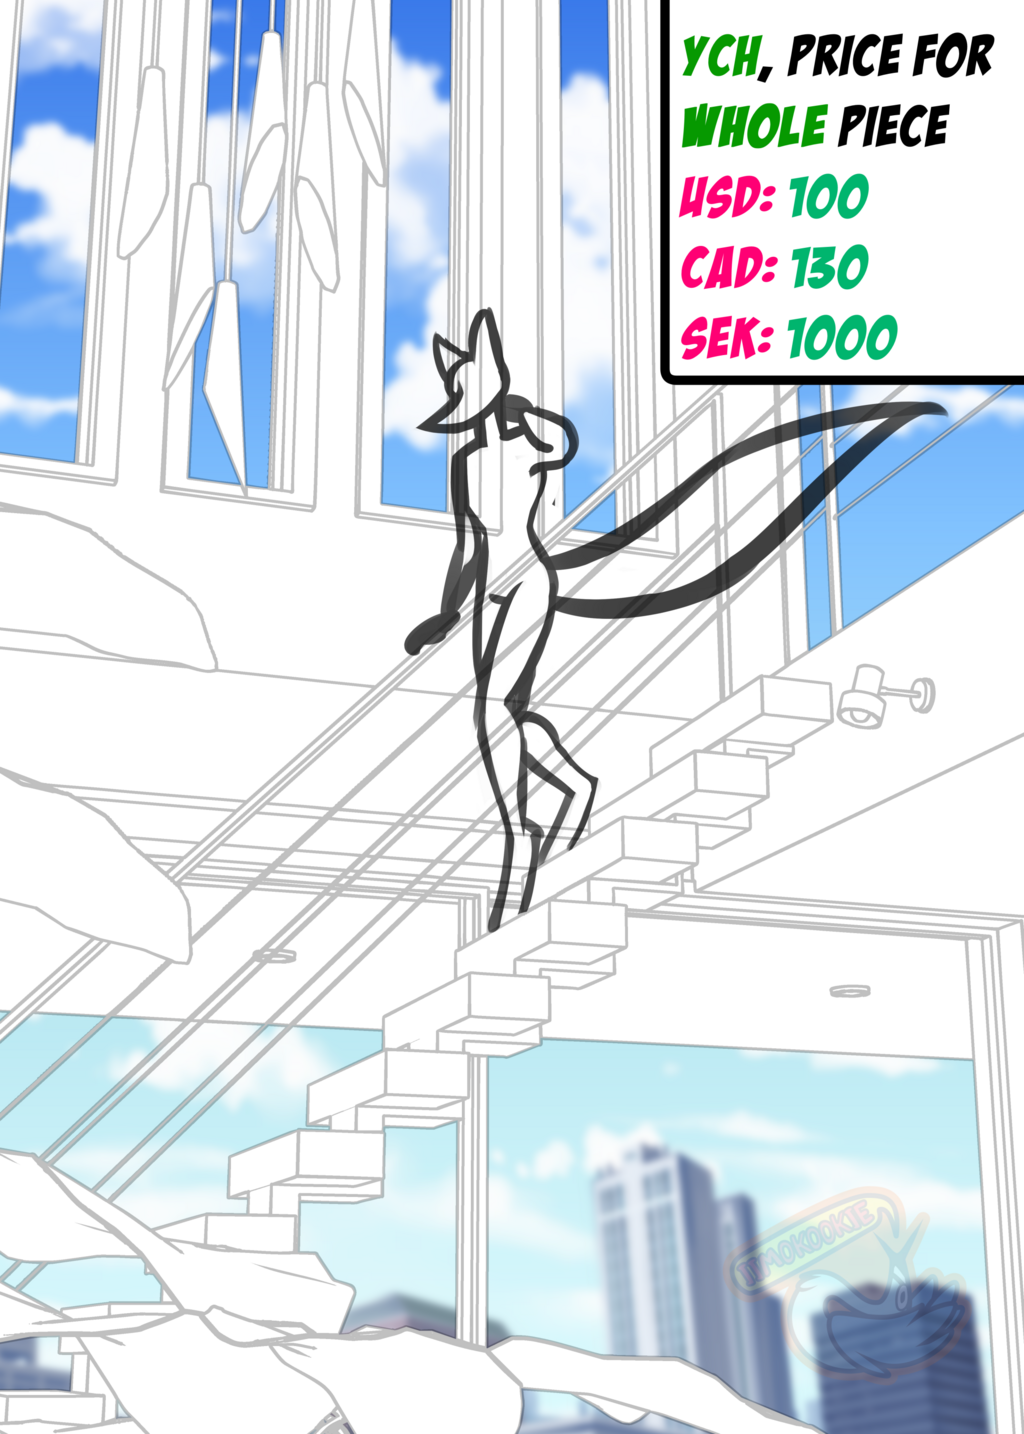 YCH - Midday nap - 100 USD